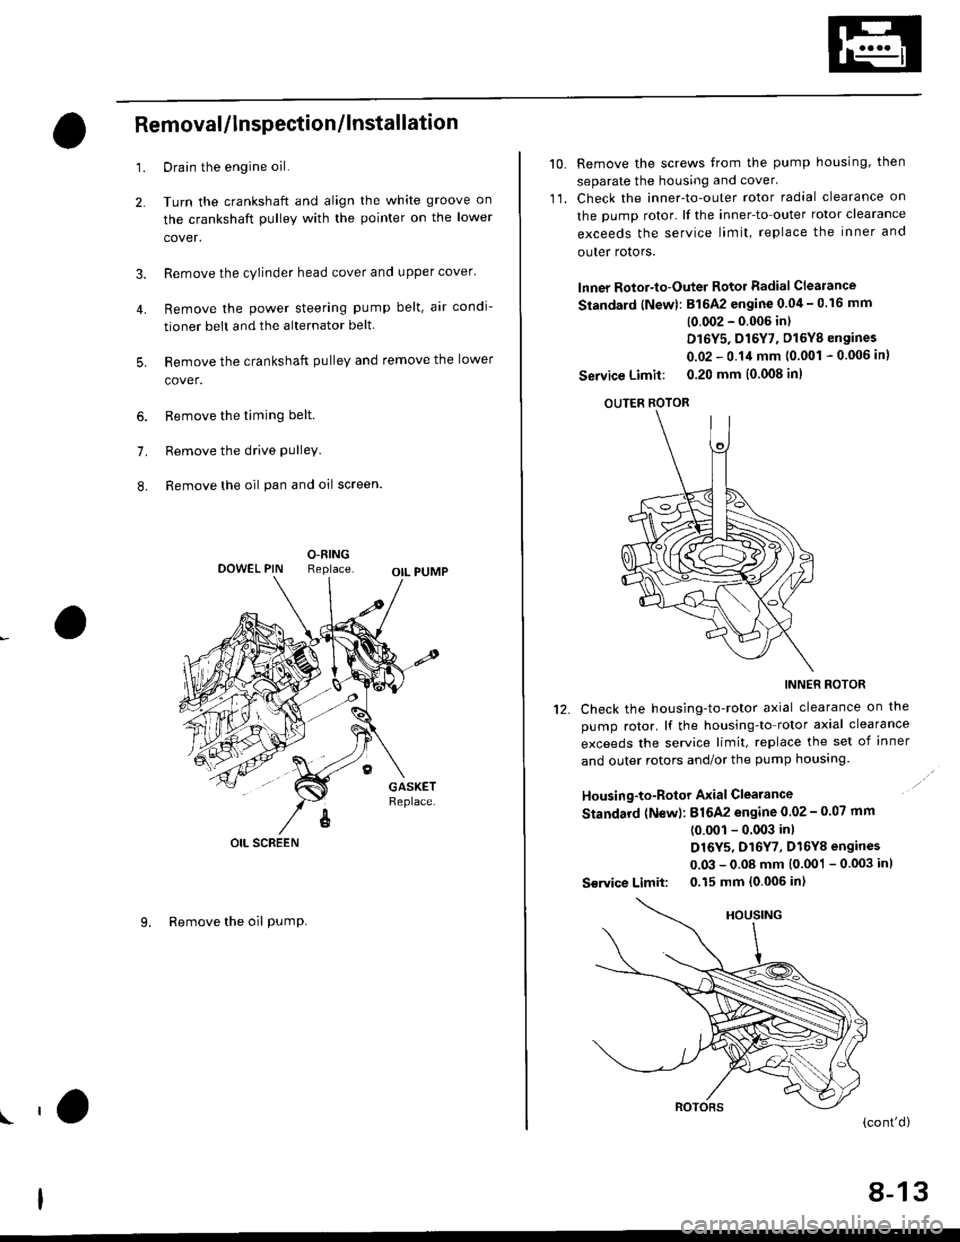 HONDA CIVIC 1996 6.G Owners Manual 4.
Removal/lnspection/lnstallation
2.
3.
1.
5.
6.
1.
8.
Drain the engine oil.
Turn the crankshaft and align the white groove on
the crankshaft pulley with the pointer on the lower
cover.
Remove the cy